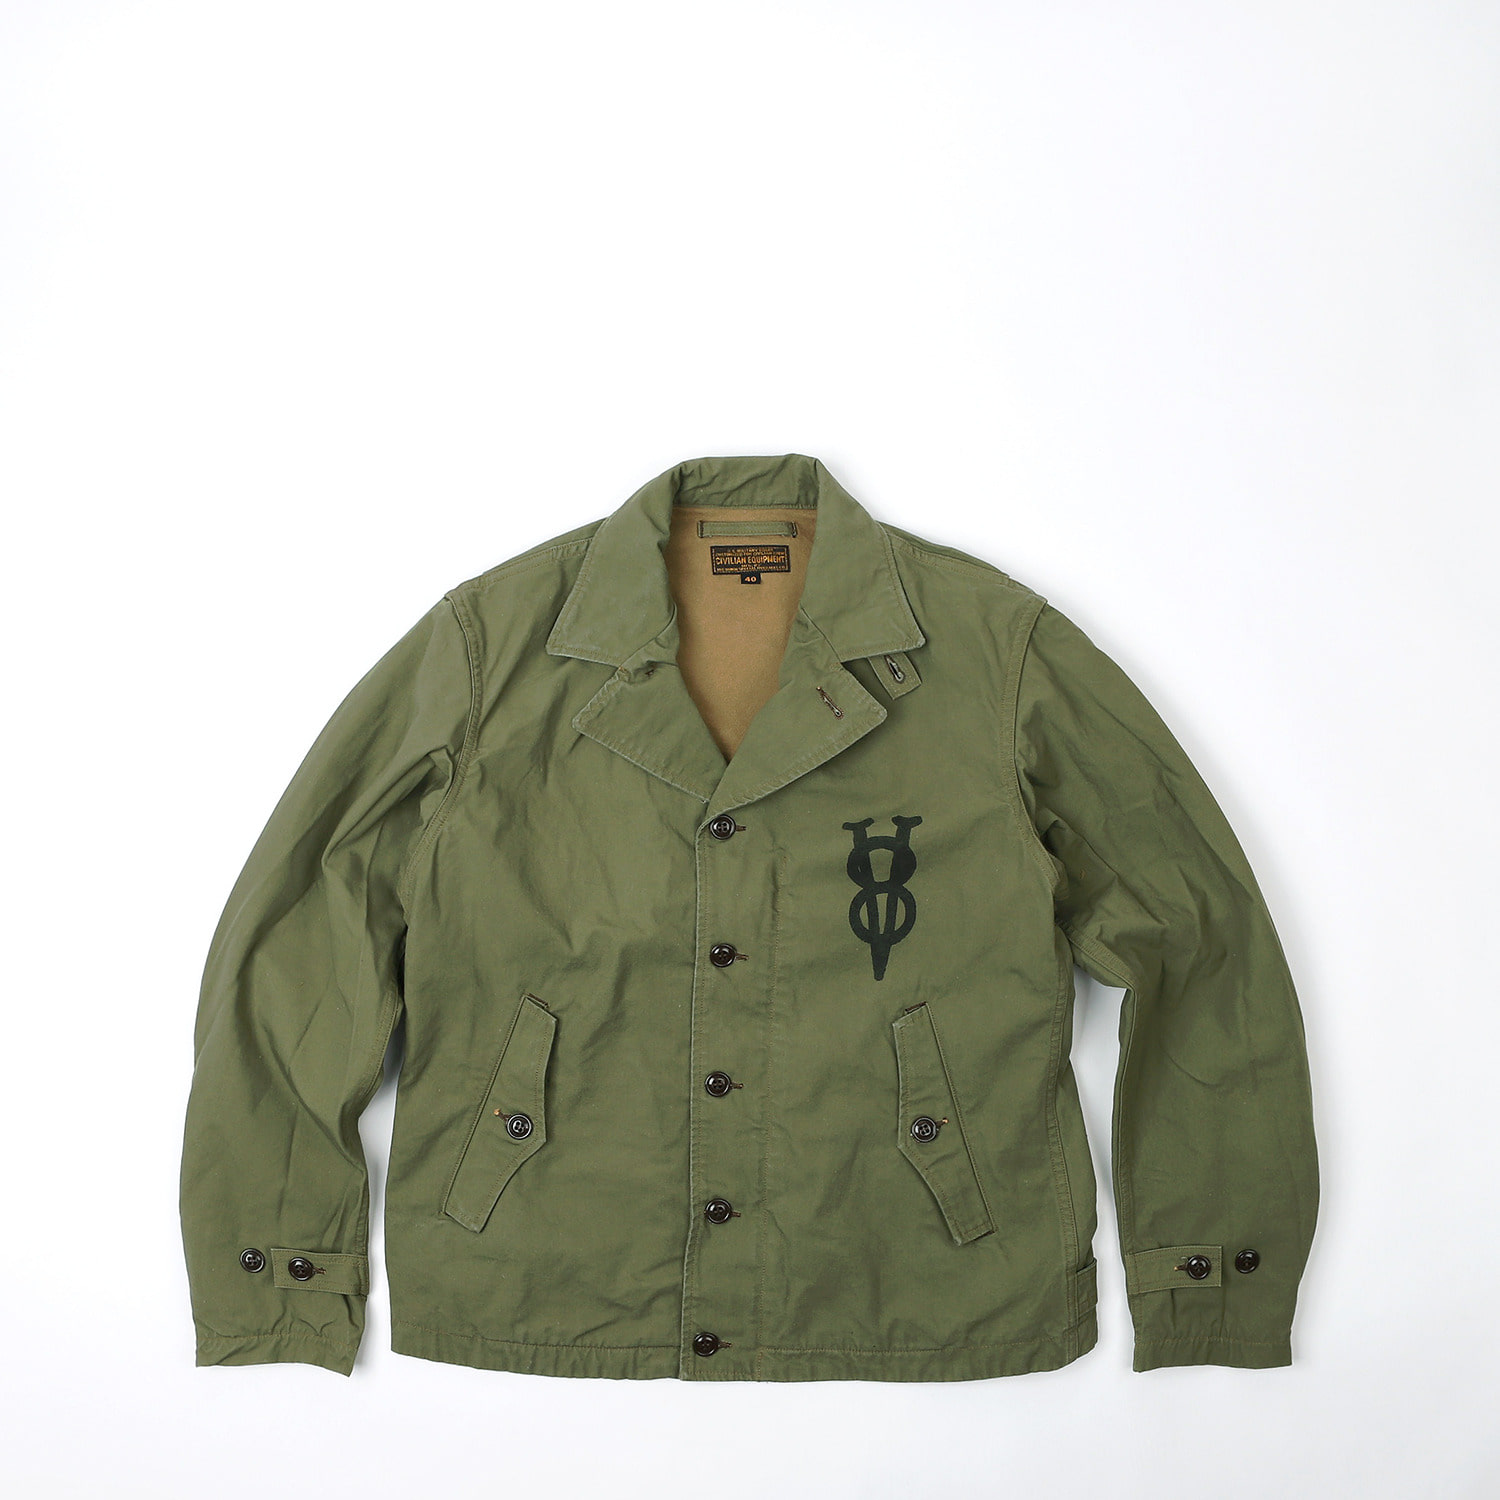 [UNION SPECIAL OVERALLS]Civilian Military jacket M-1938 FIELD JACKET&quot;V8 150 MPH CLUB&quot; (Olive)